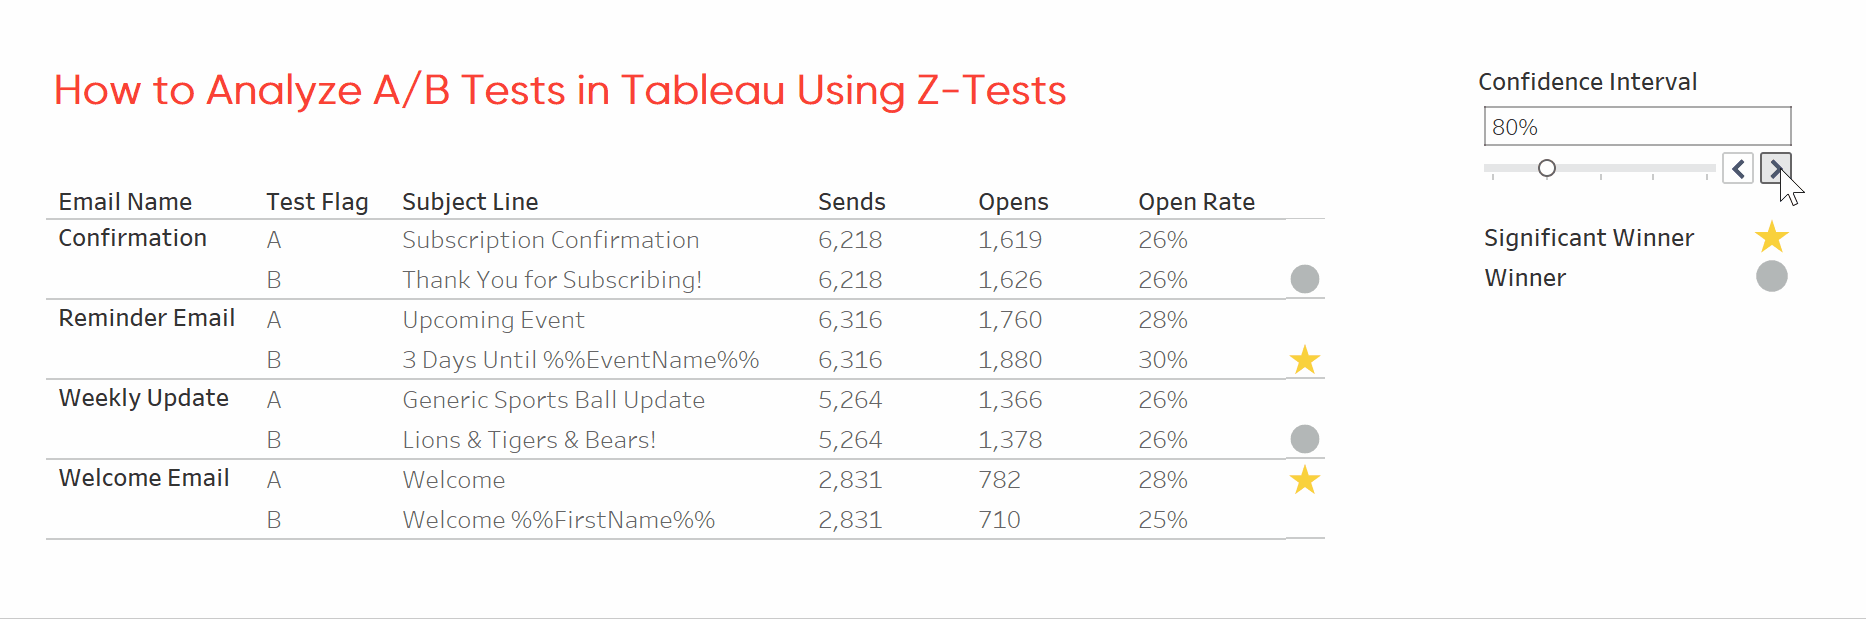 How to Analyze A/B Tests in Tableau Using Z-Tests